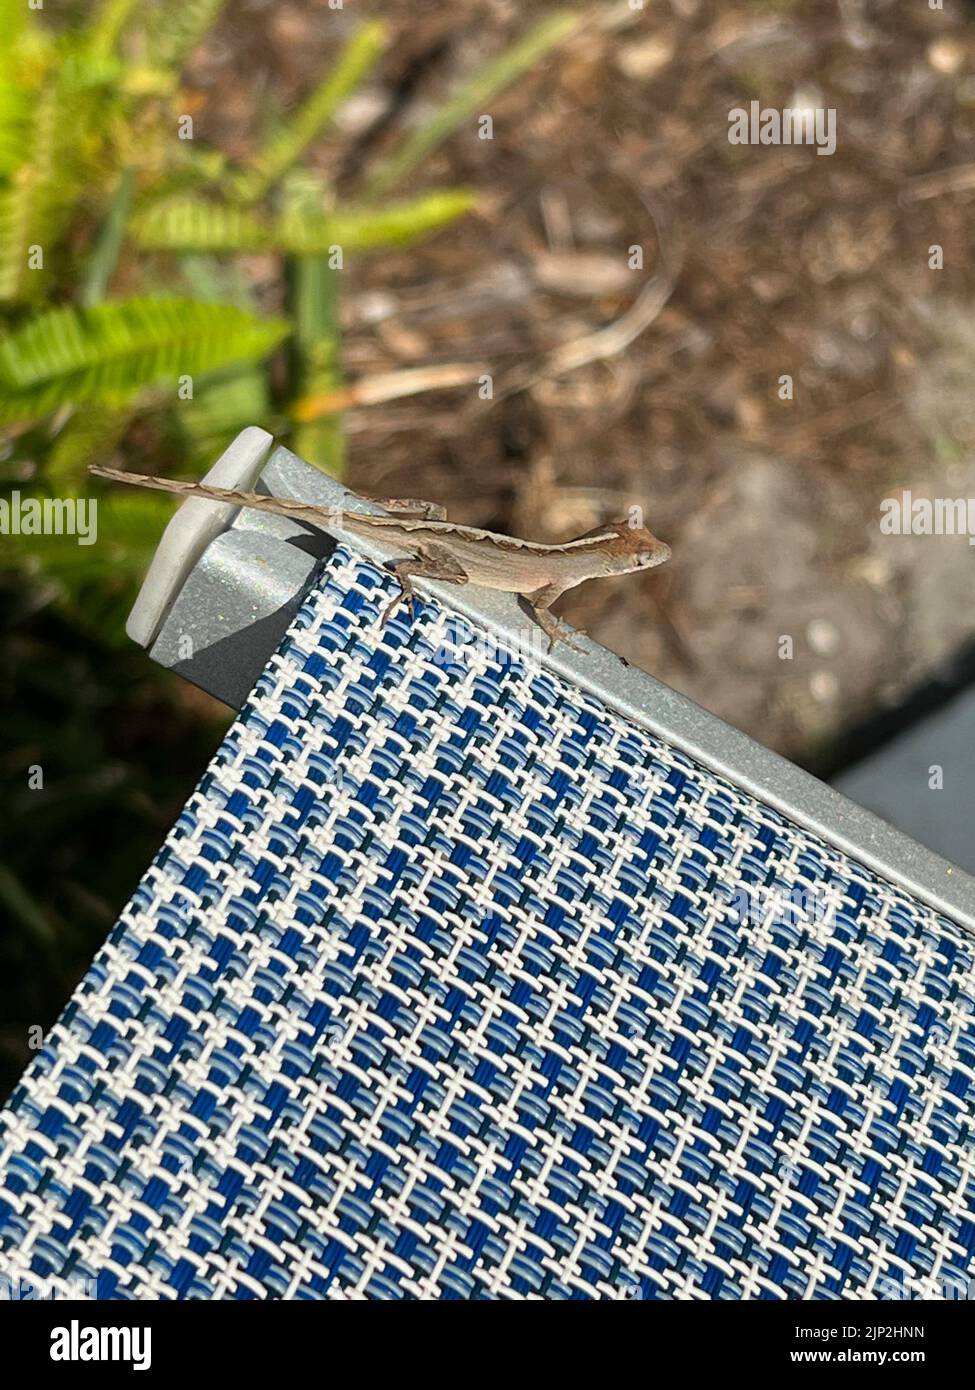 A Closeup of brown anole on a metal Stock Photo